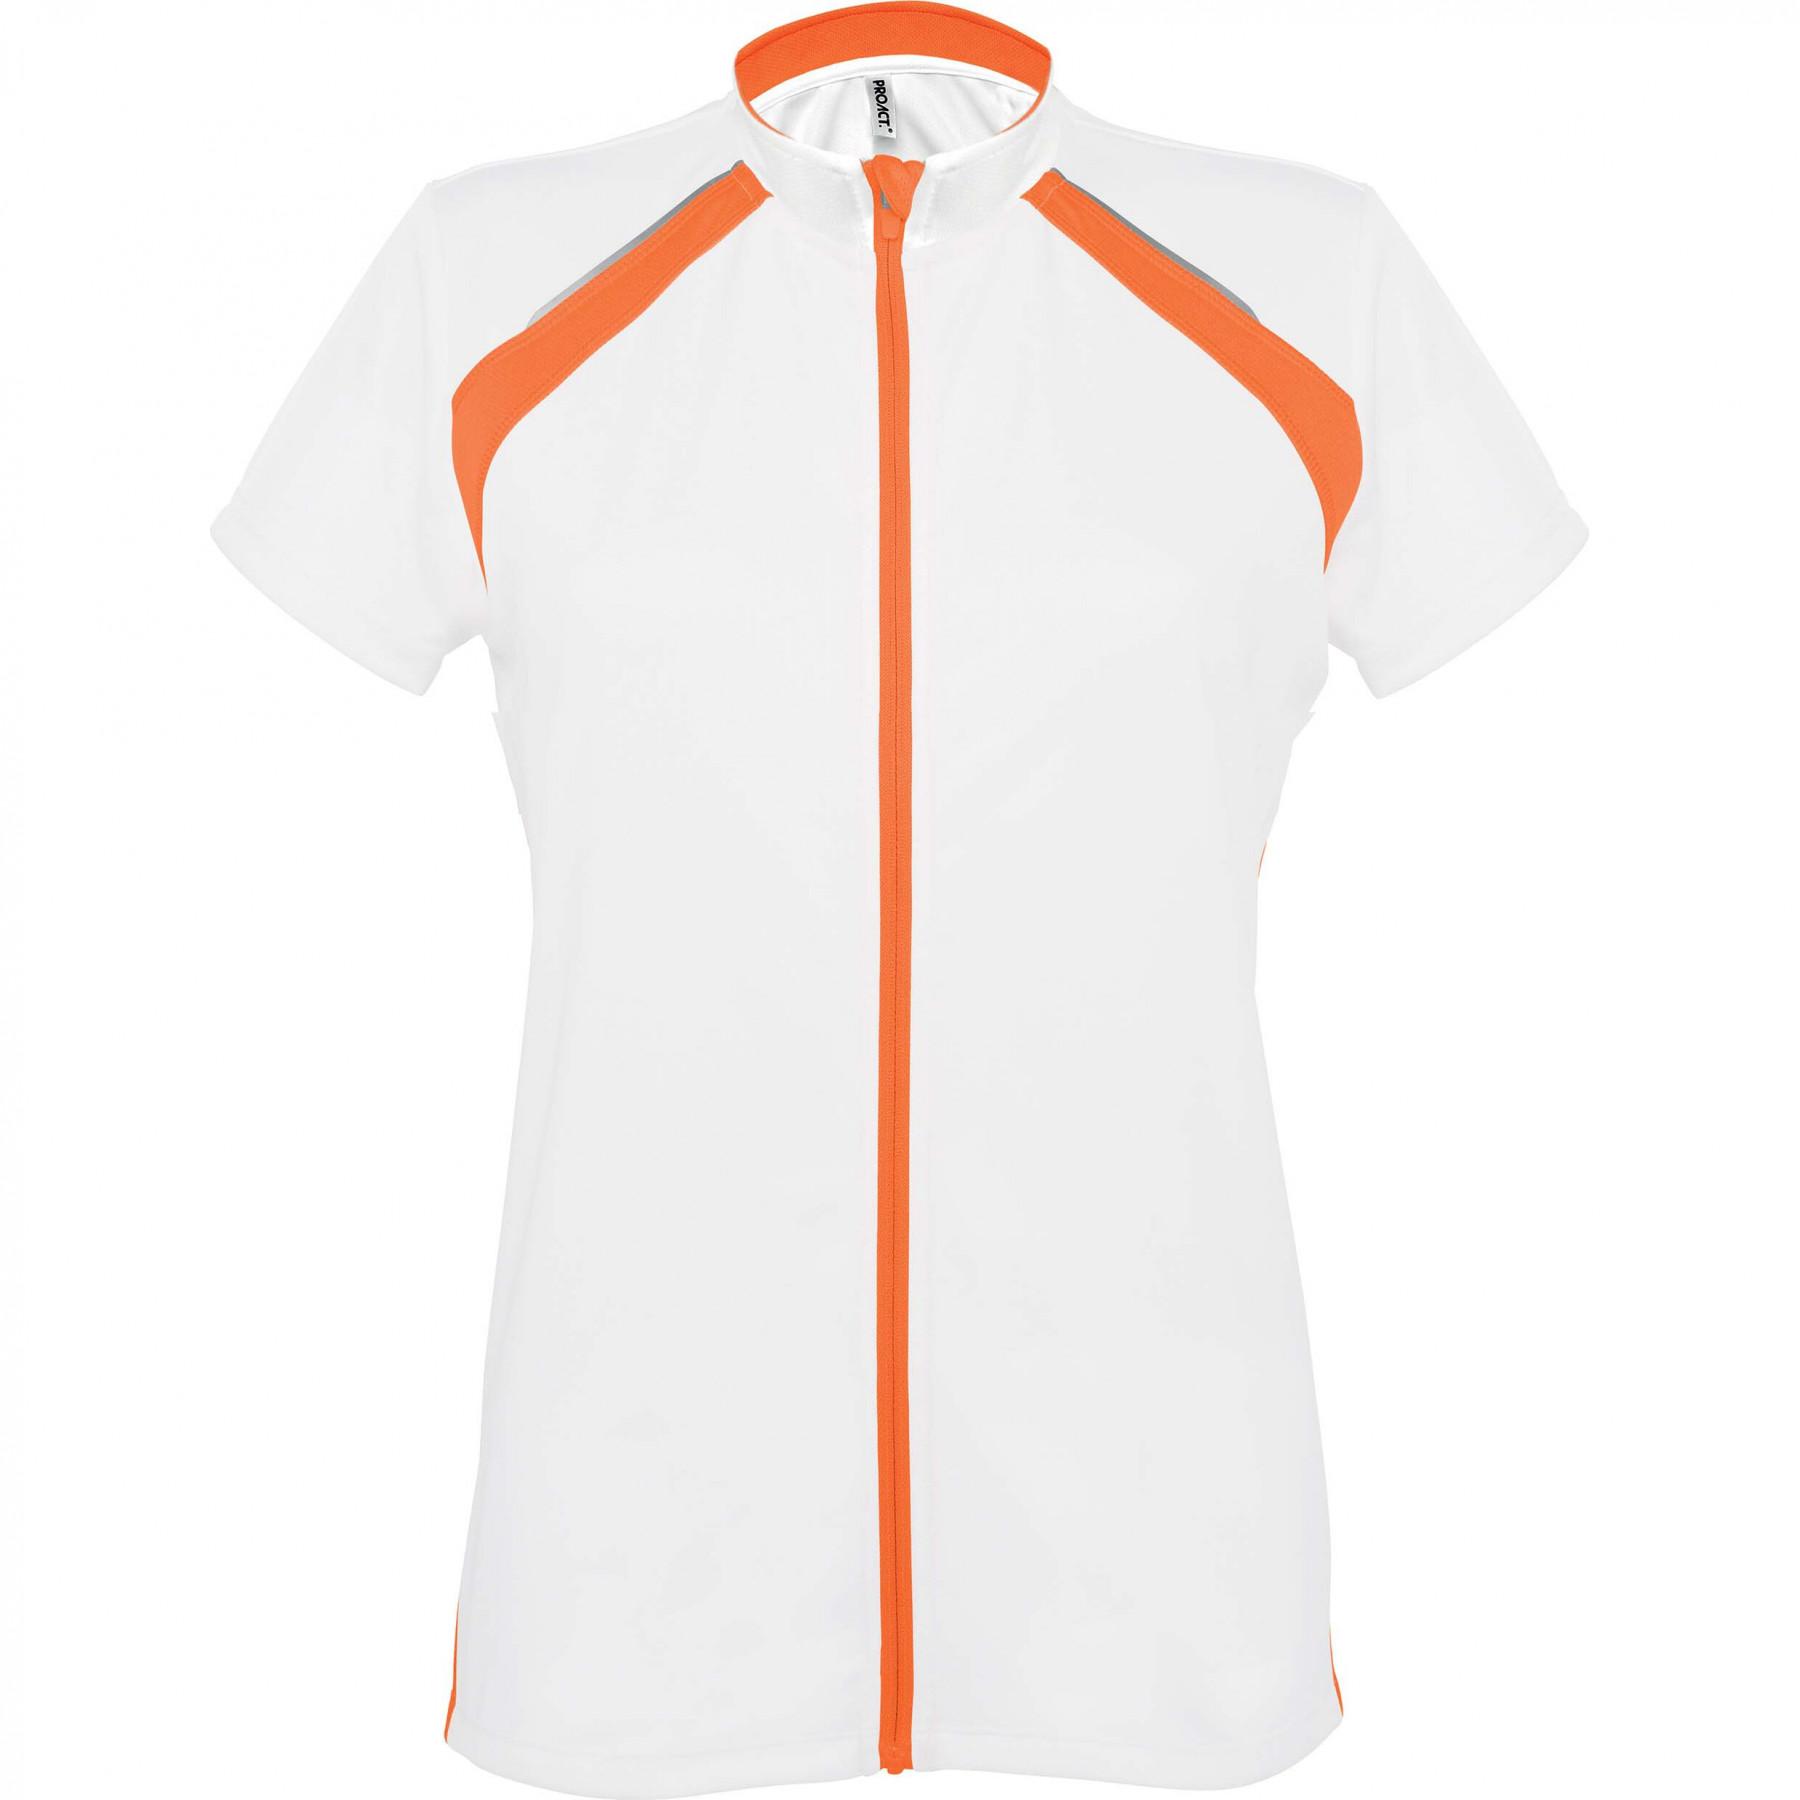 Camisola mulher Proact Cyclismo